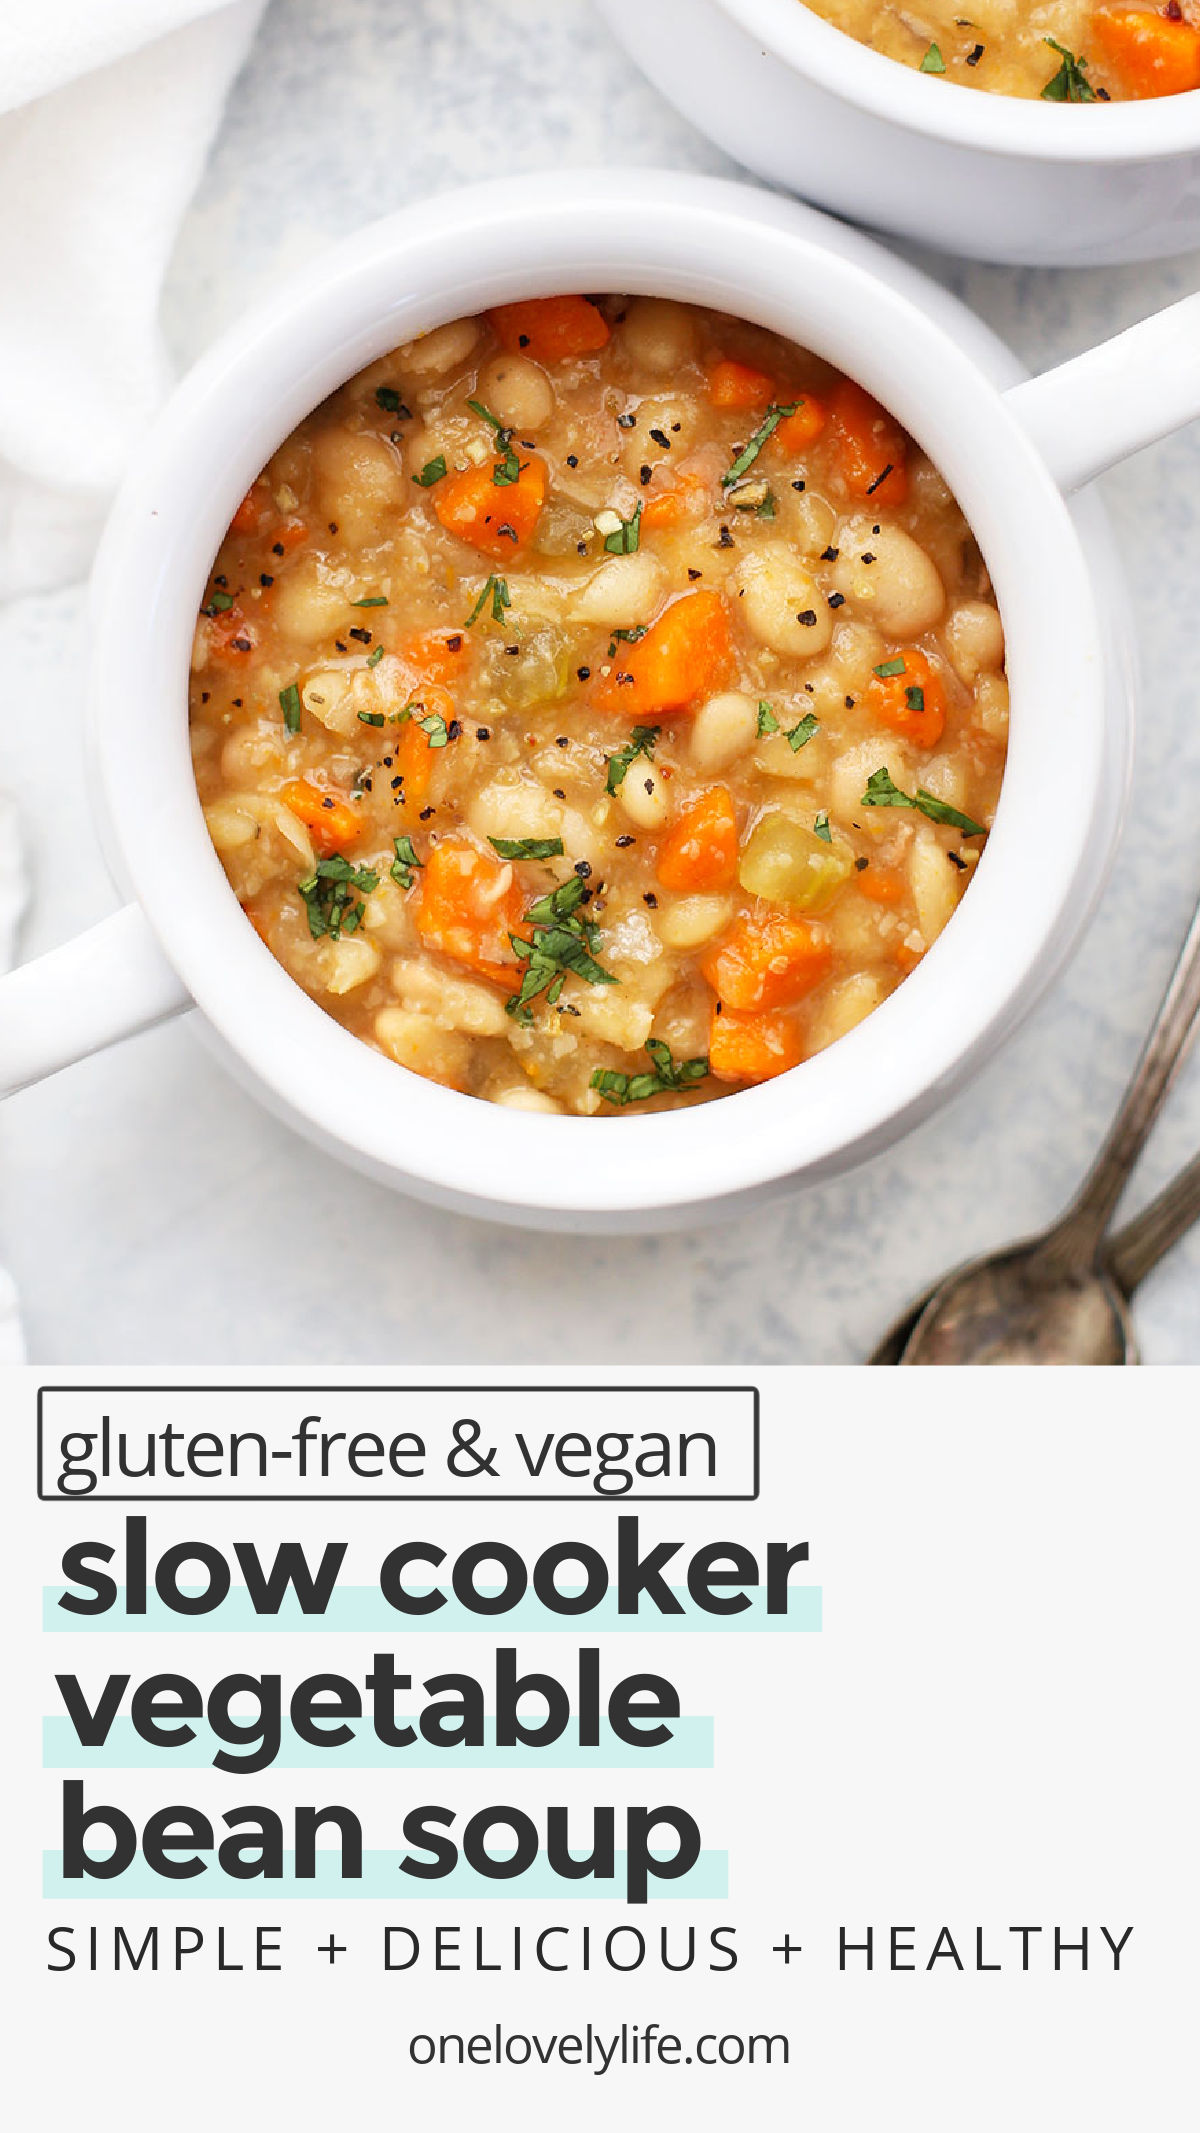 Slow Cooker Vegetable Bean Soup - Sometimes the easiest recipes are the best! This vegetable bean soup is made in a slow cooker and has the perfect cozy blend of flavors. We love this so much! (Gluten Free & Vegan) // Crock Pot Vegetable Bean Soup // Slow Cooker Soup Recipe // Crock Pot Soup Recipe // Vegan Slow Cooker Recipe // Vegetarian Slow Cooker Recipe // Vegan Soup // Vegetarian Soup // Bean Soup #beansoup #slowcookersoup #vegansoup #vegetablesoup #vegetariansoup #glutenfree #slowcooker